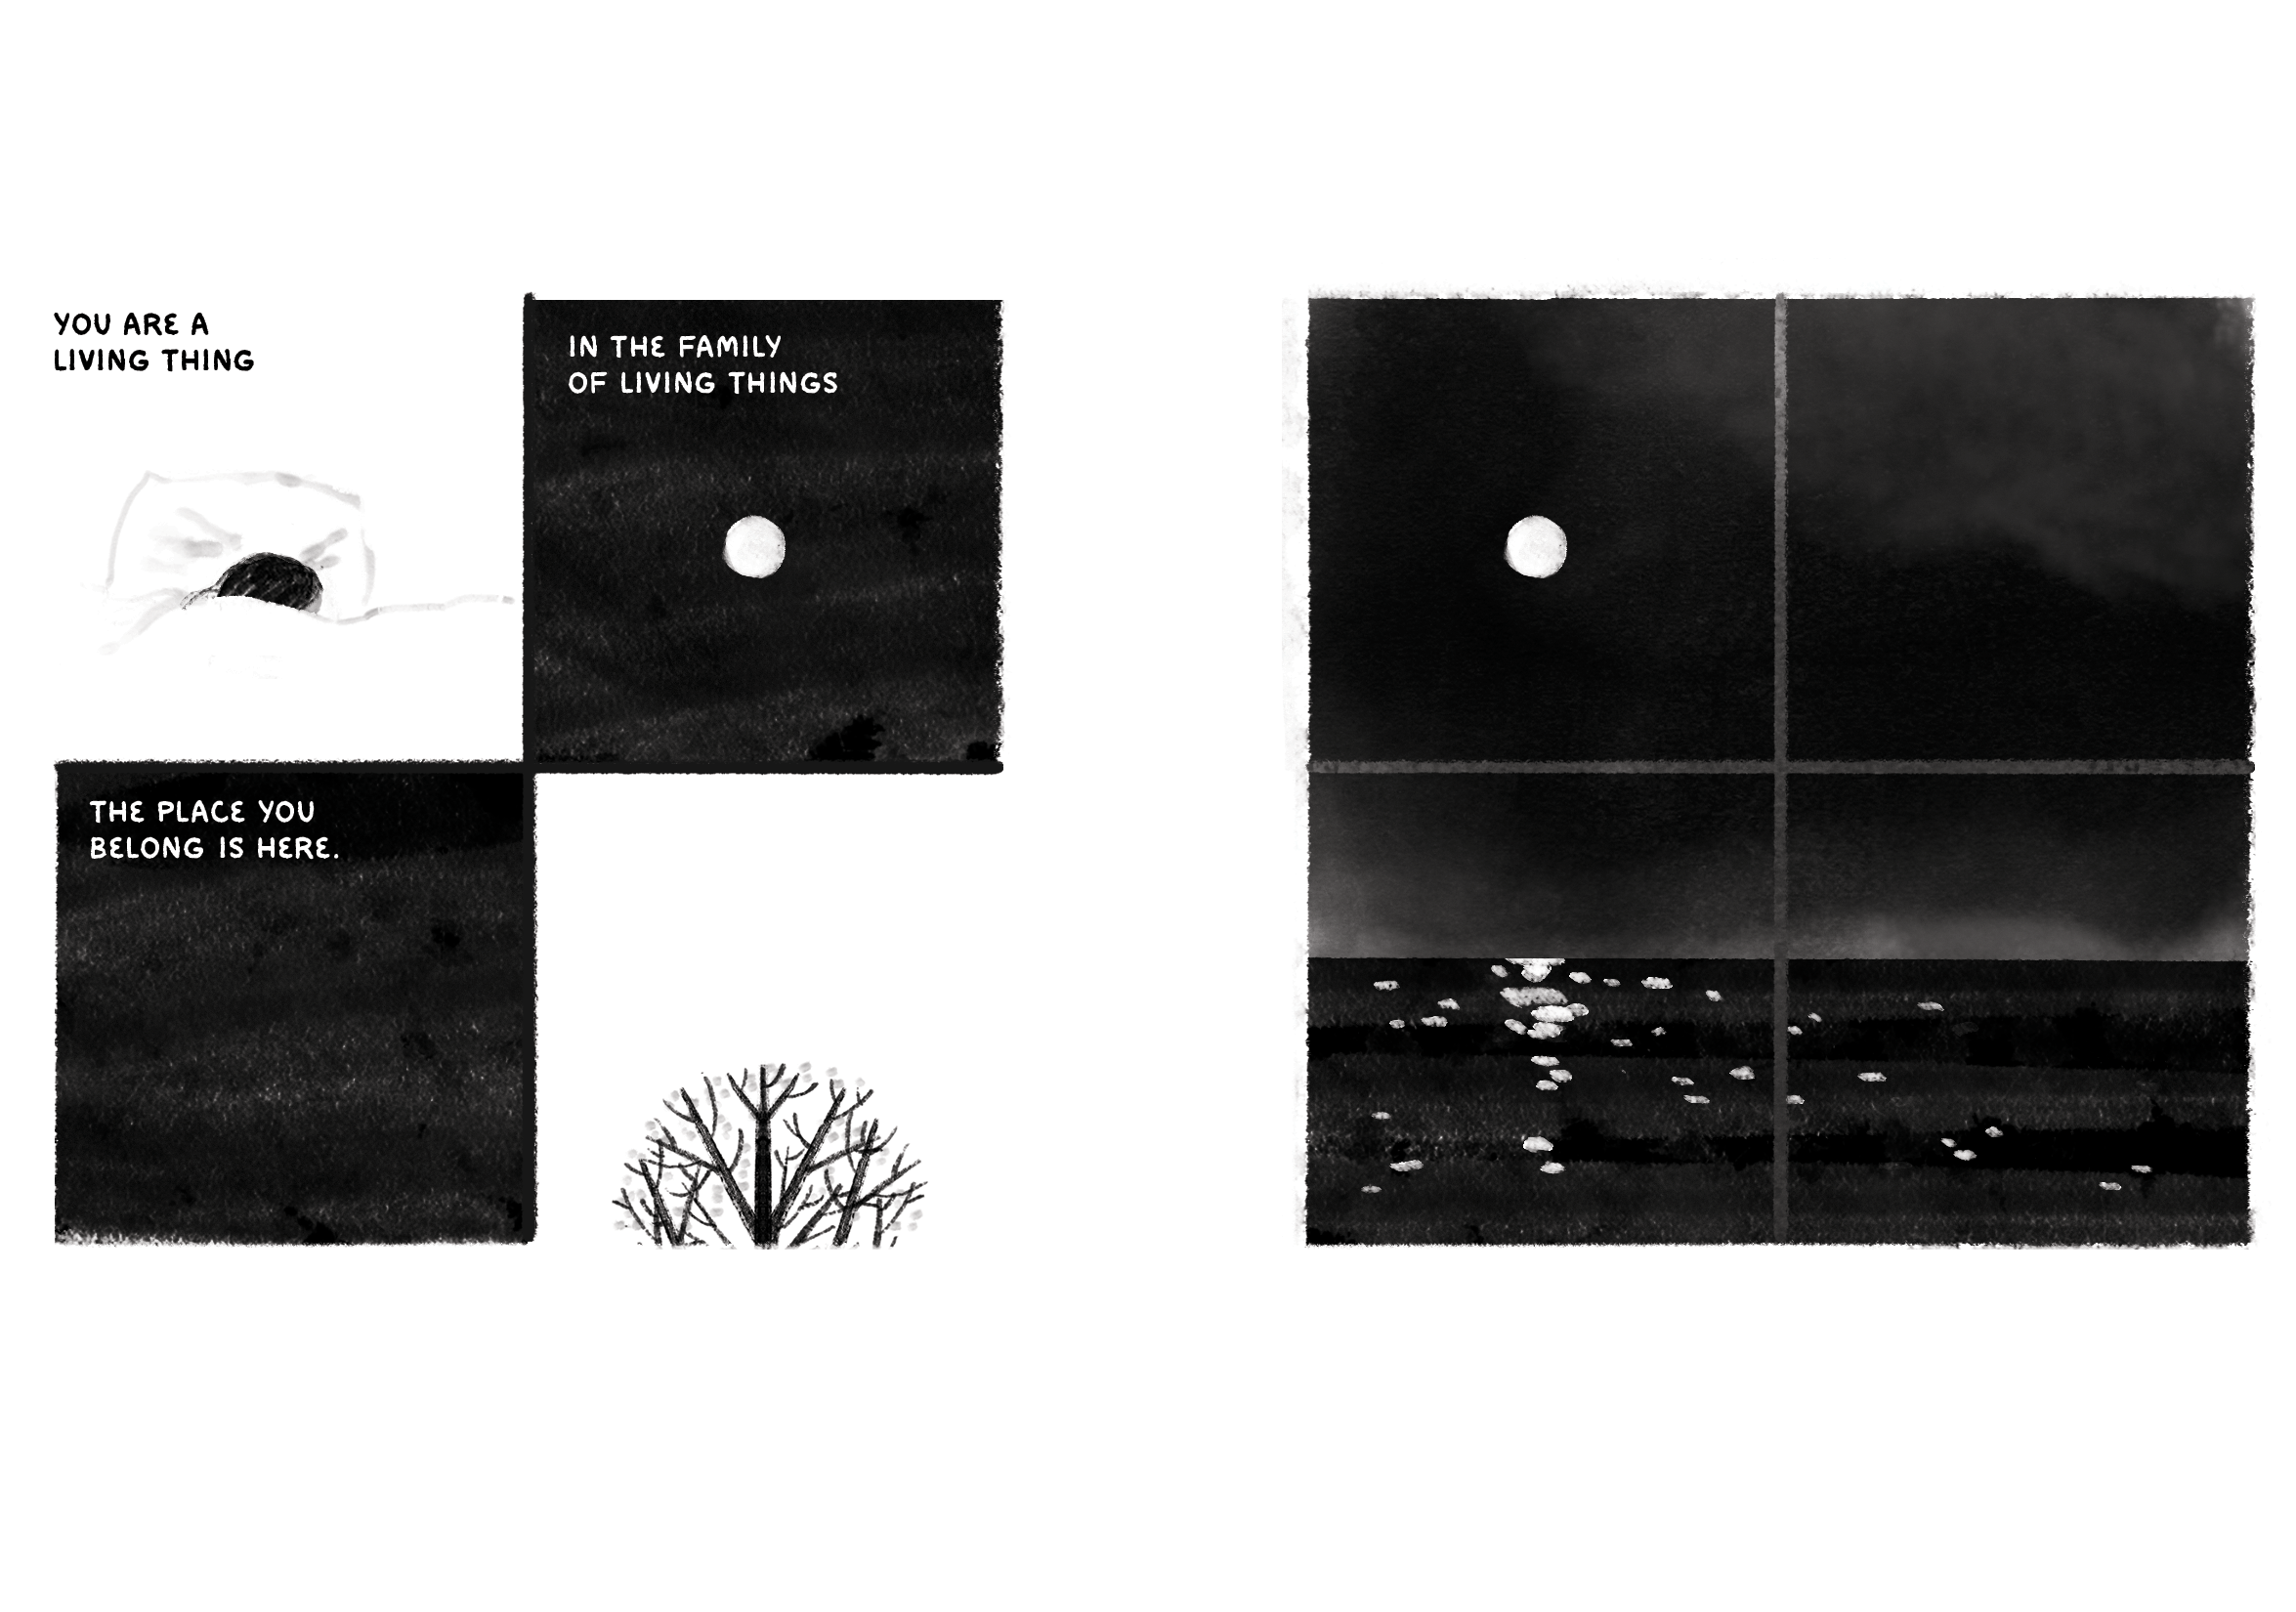 Two four-panel comics. First comic text: You are a living thing, in the family of living things. The place you belong is here. First comic images: A figure cuddles down deeper in bed. A moon in a starless sky. A budding tree in spring. Second comic has no text. Second comic image: A moon in a starless sky. 